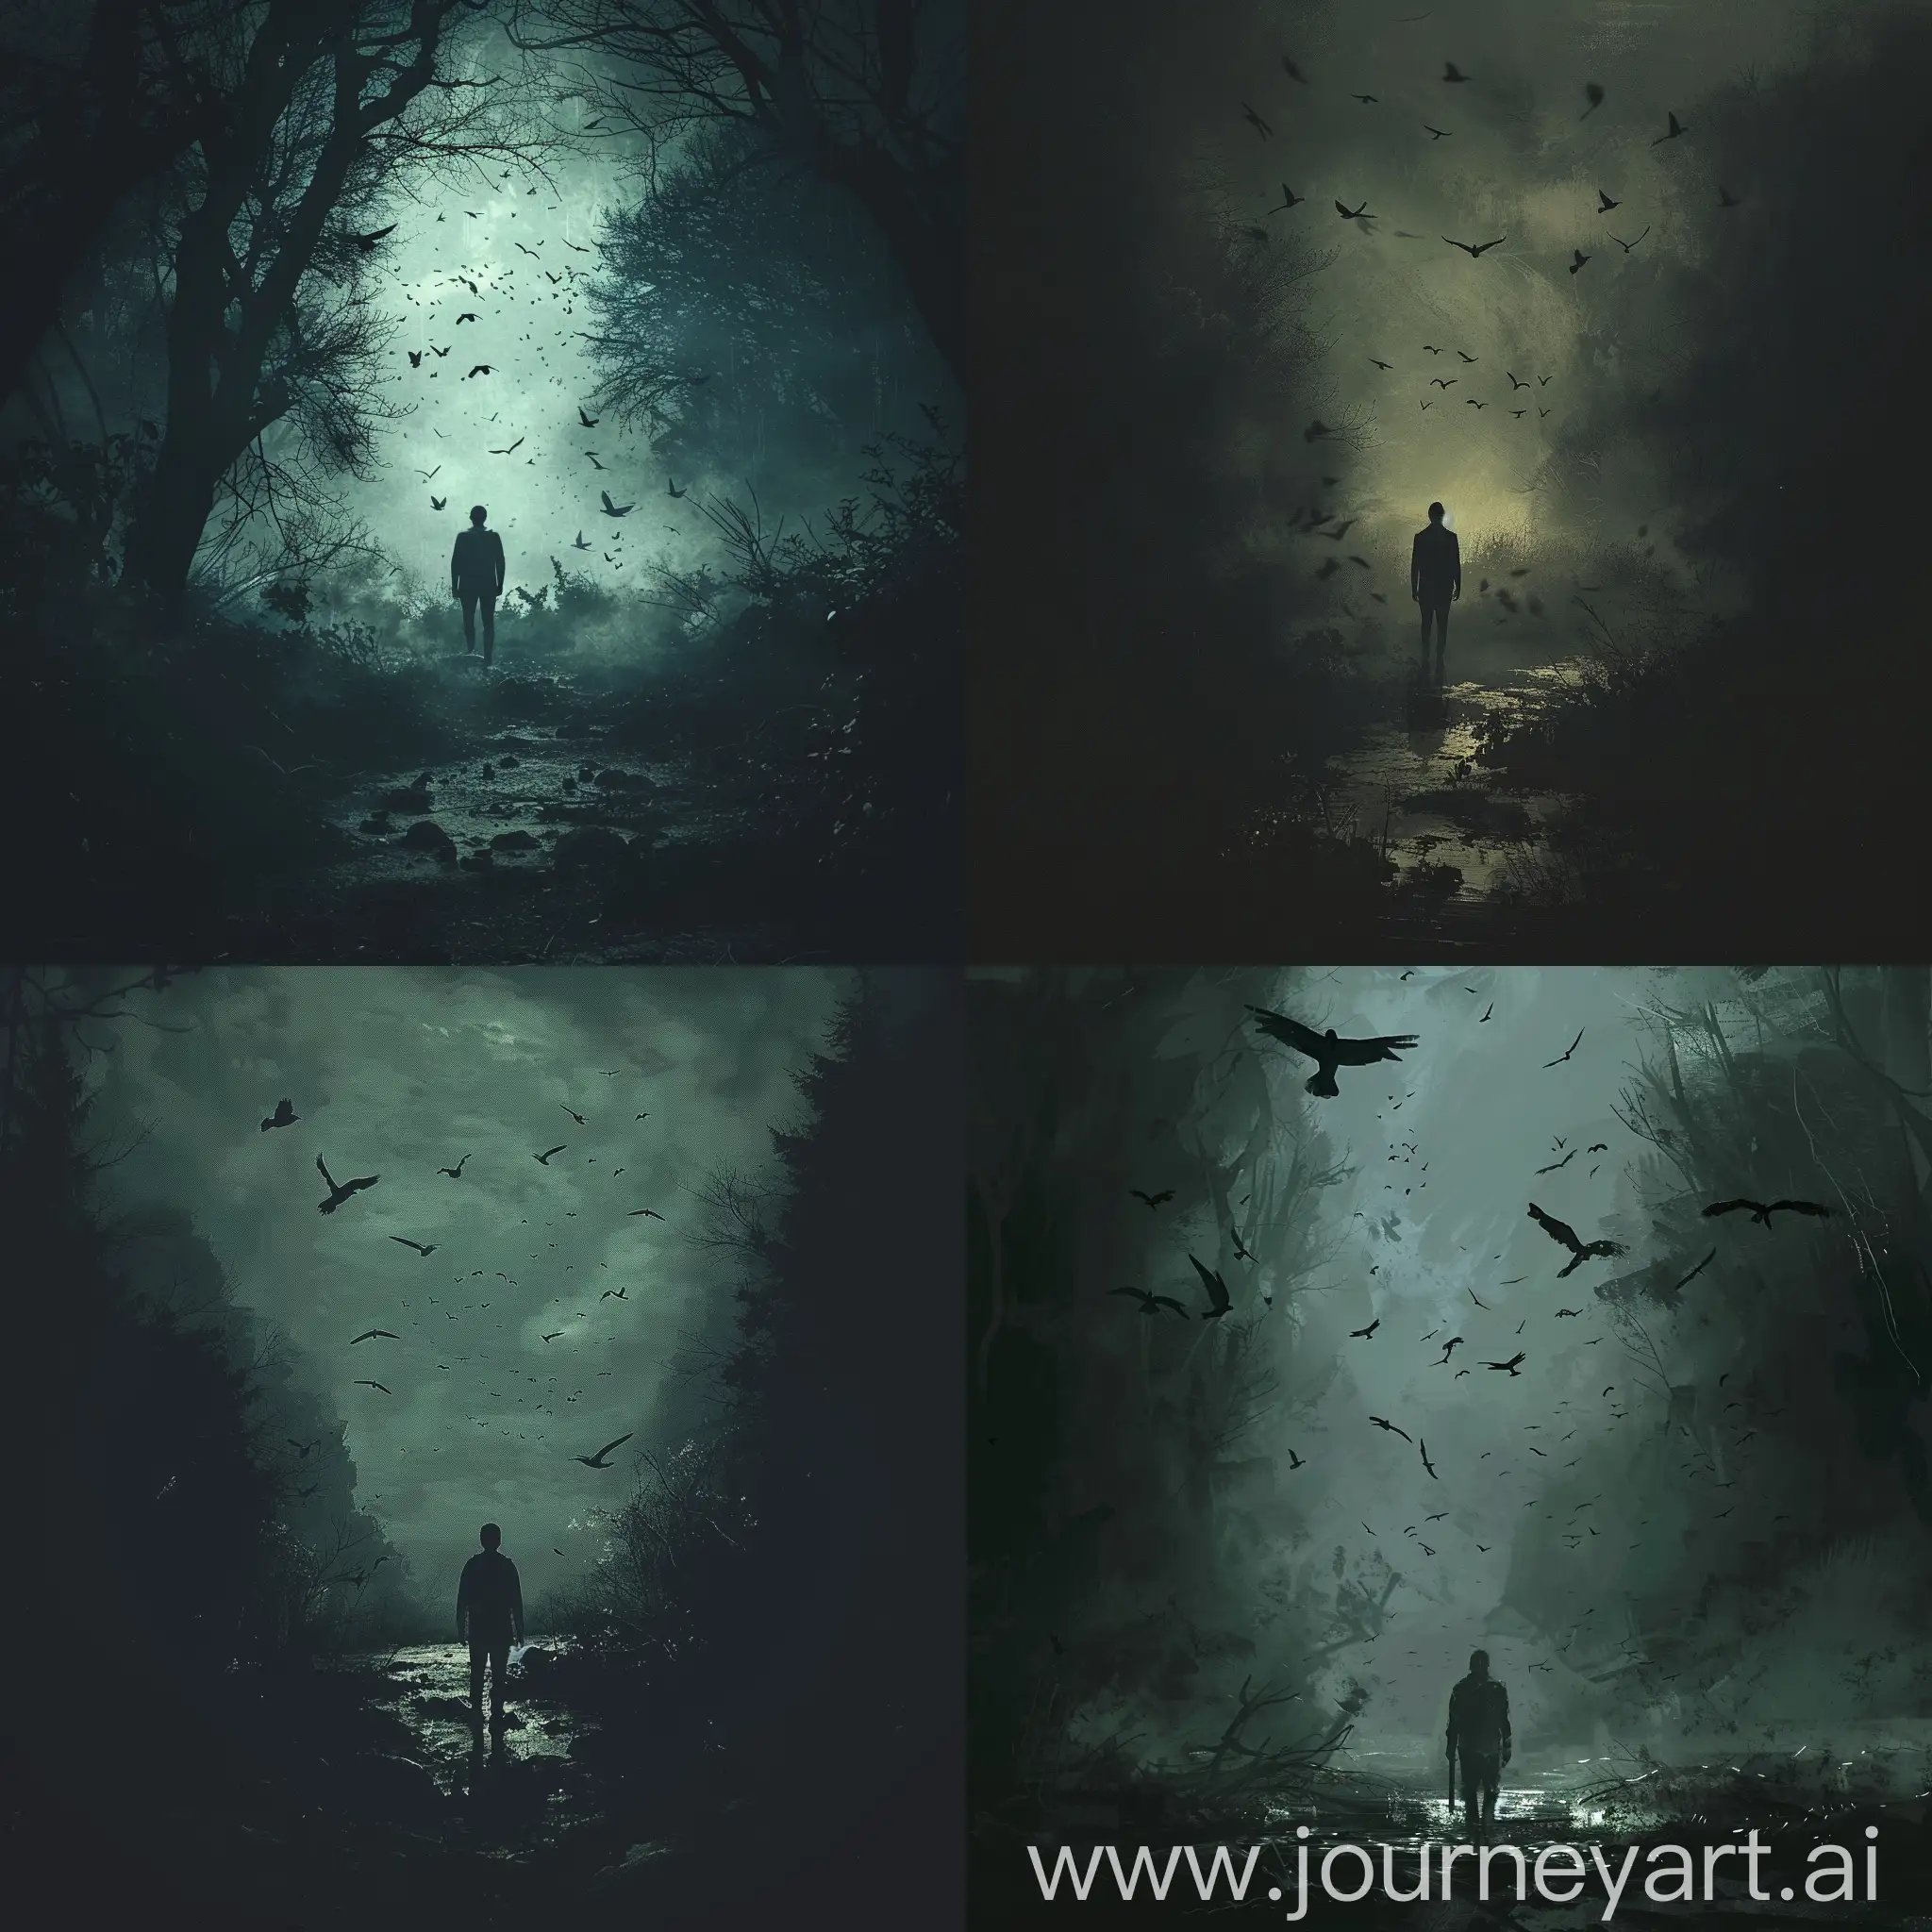 Solitary-Figure-in-Enchanted-Forest-with-Flying-Birds